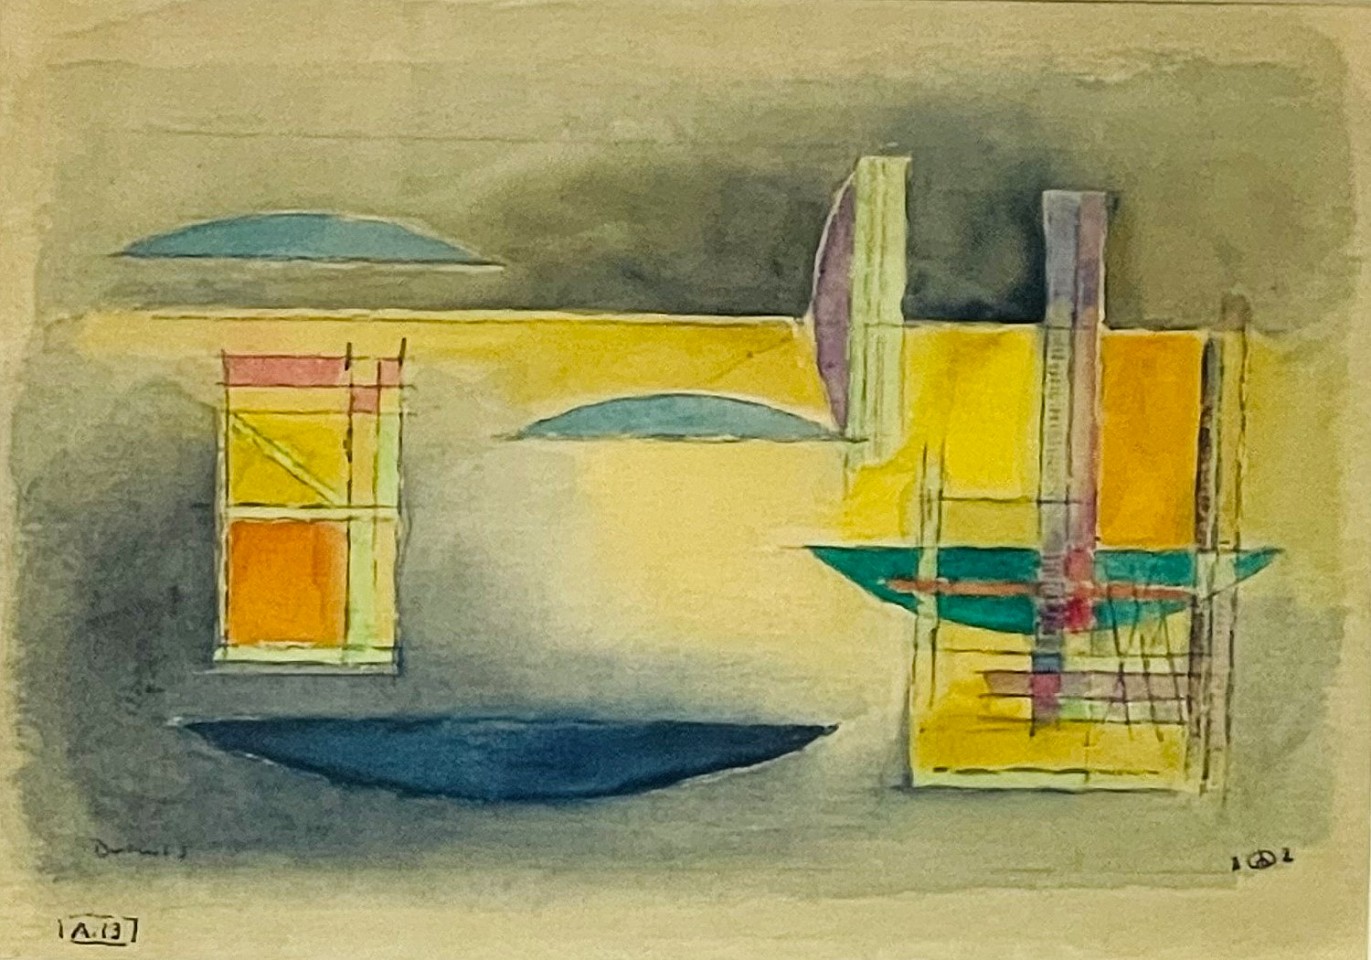 Werner Drewes, Untitled, 1932
Watercolor on Paper, 6 3/4 x 9 3/4 in.
DRE002